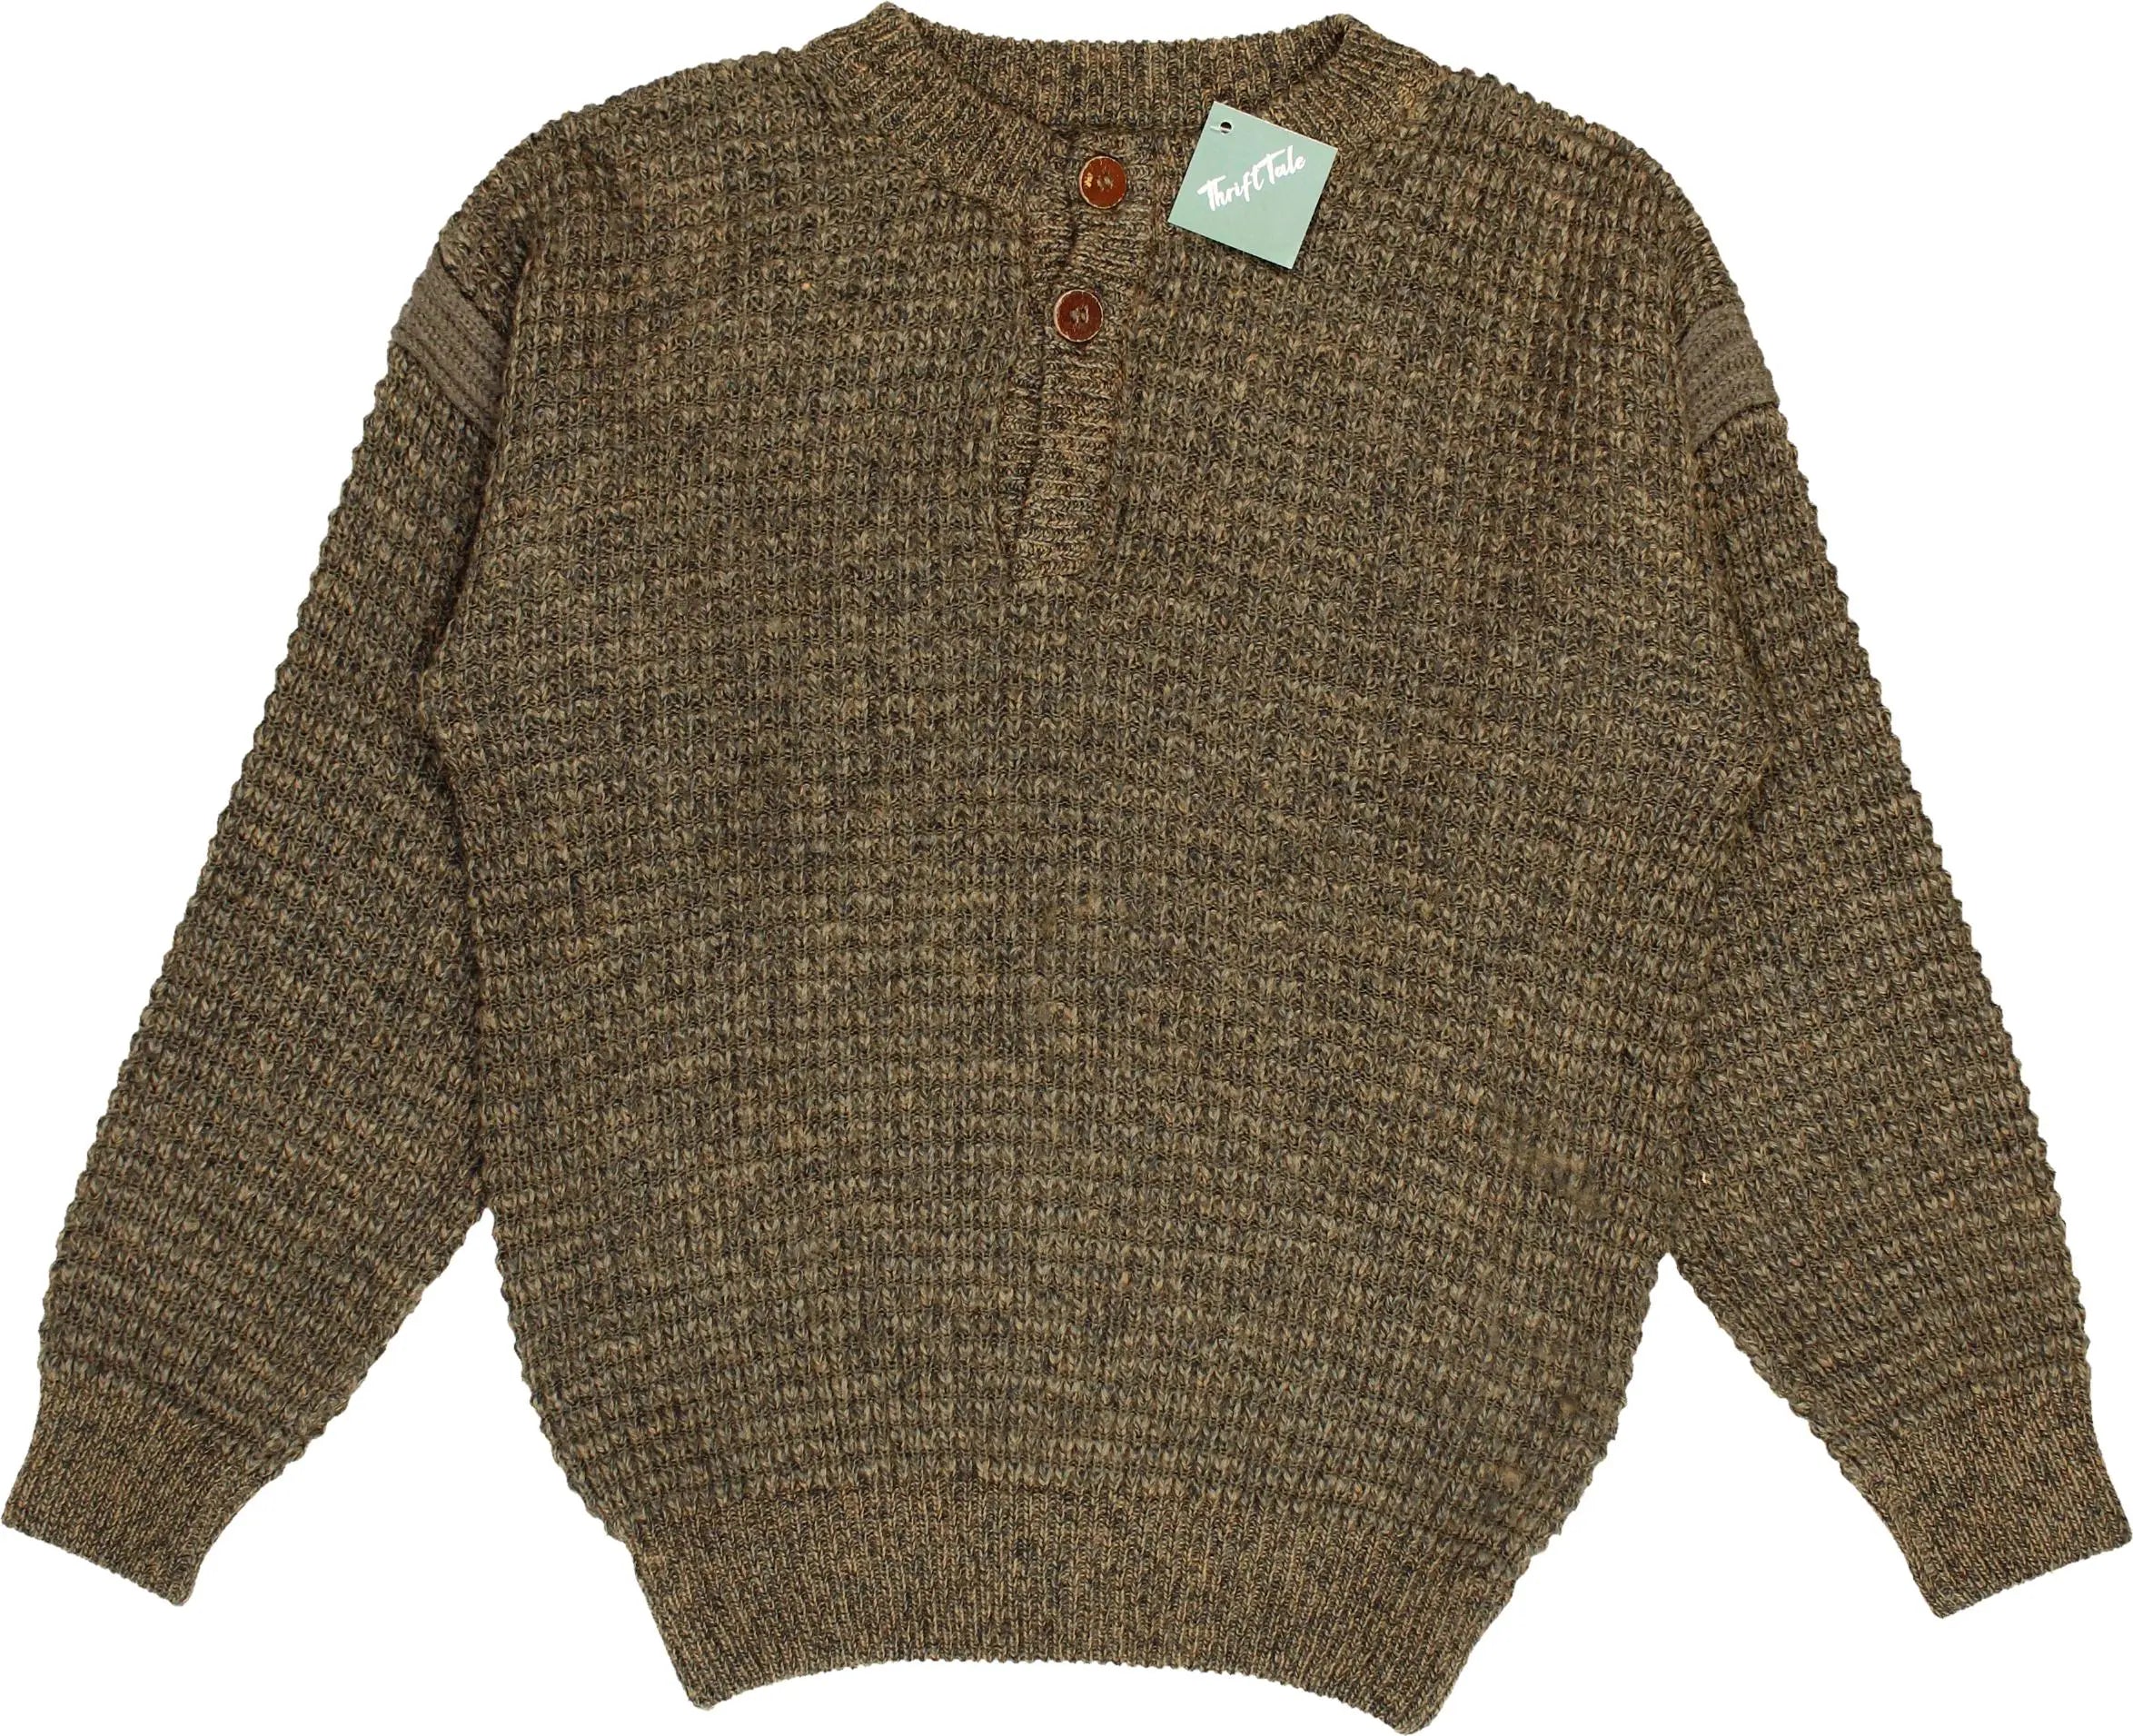 Unknown - Brown Jumper- ThriftTale.com - Vintage and second handclothing